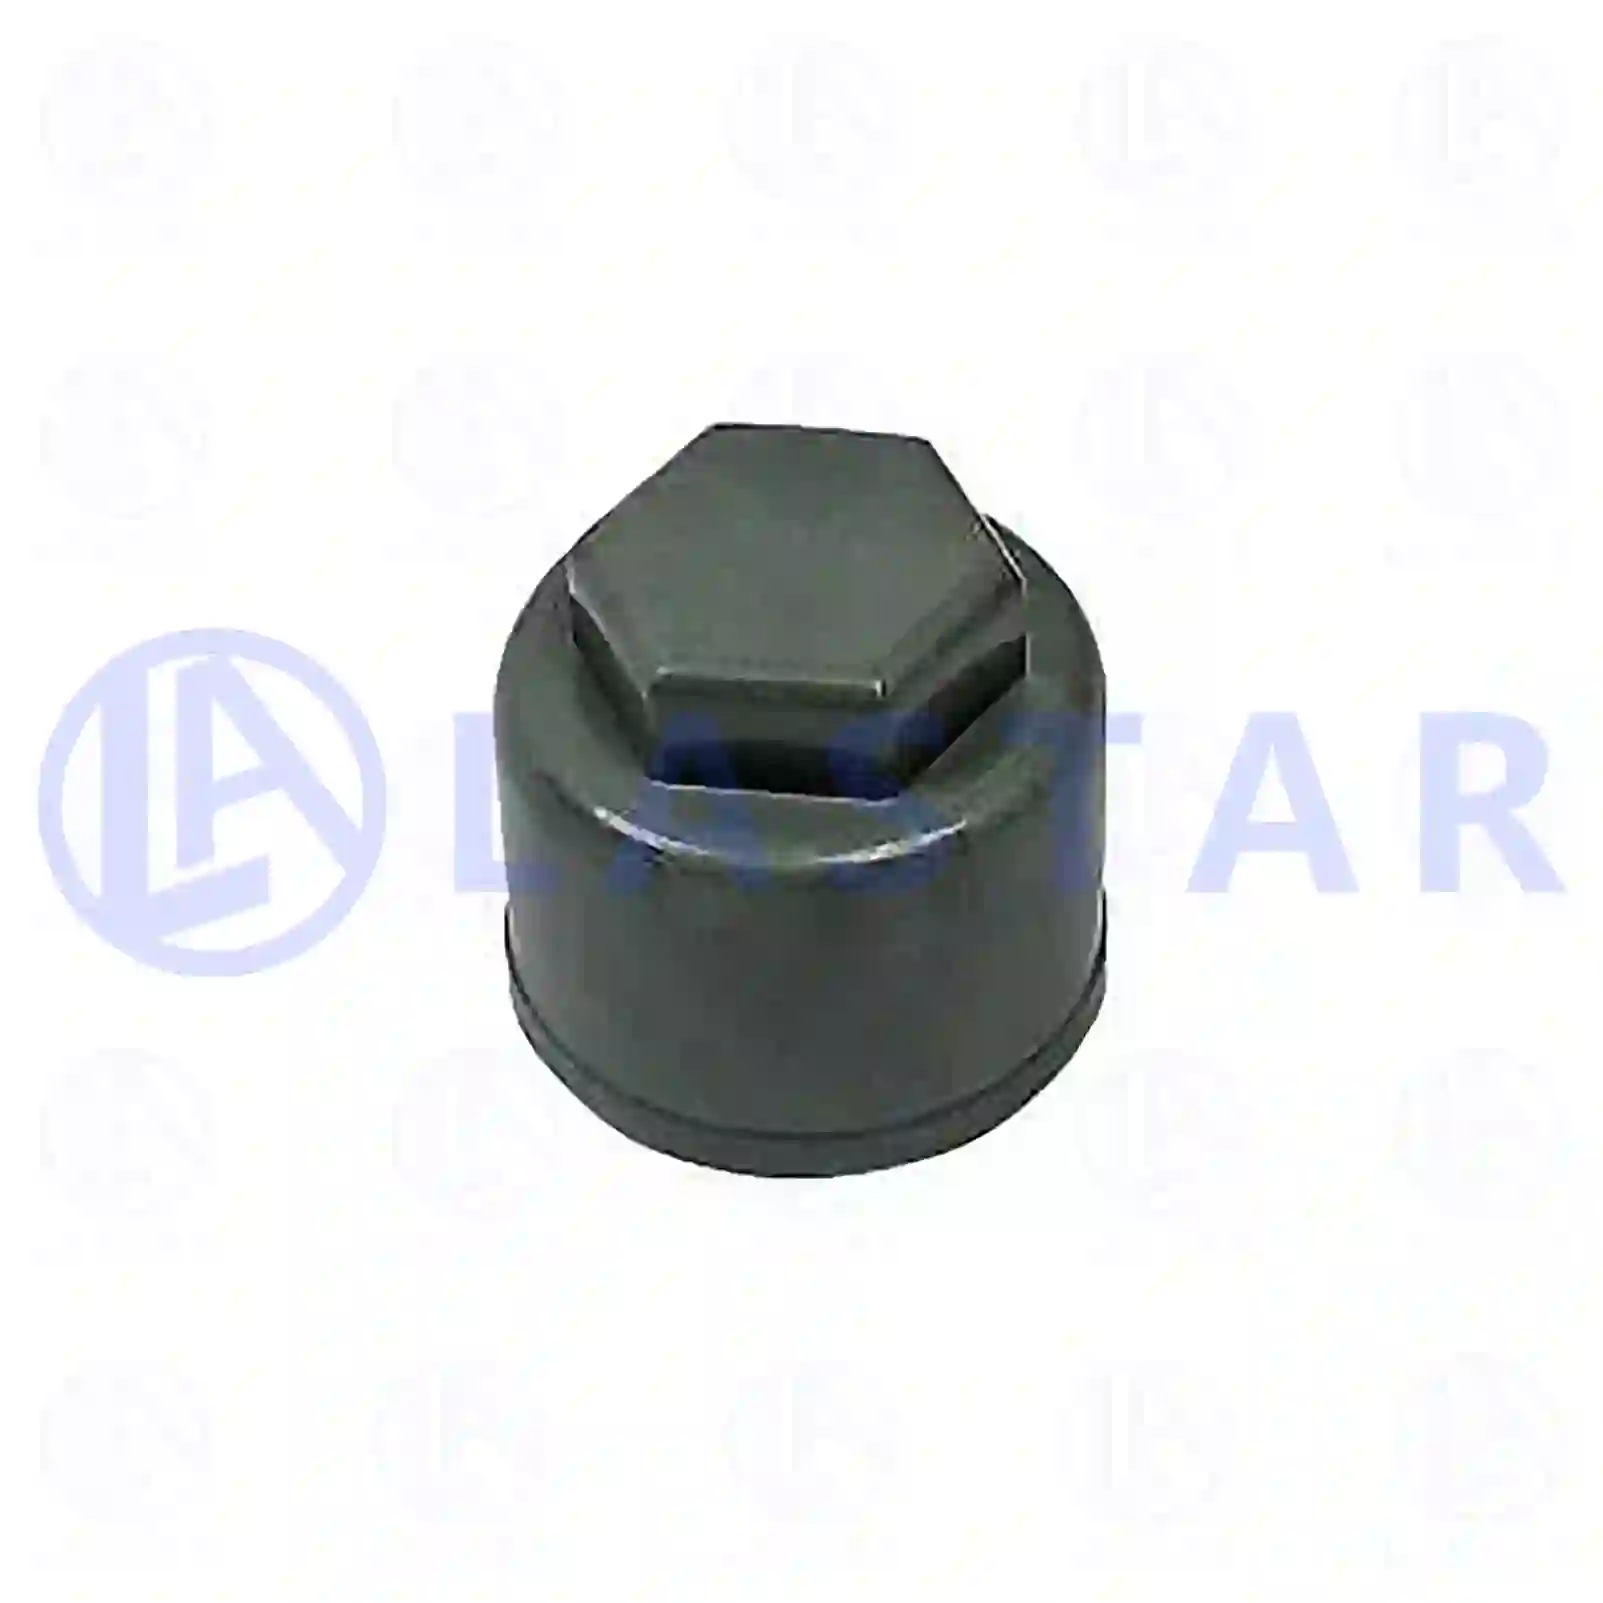 Wheel nut cover, 77726266, 19981423 ||  77726266 Lastar Spare Part | Truck Spare Parts, Auotomotive Spare Parts Wheel nut cover, 77726266, 19981423 ||  77726266 Lastar Spare Part | Truck Spare Parts, Auotomotive Spare Parts